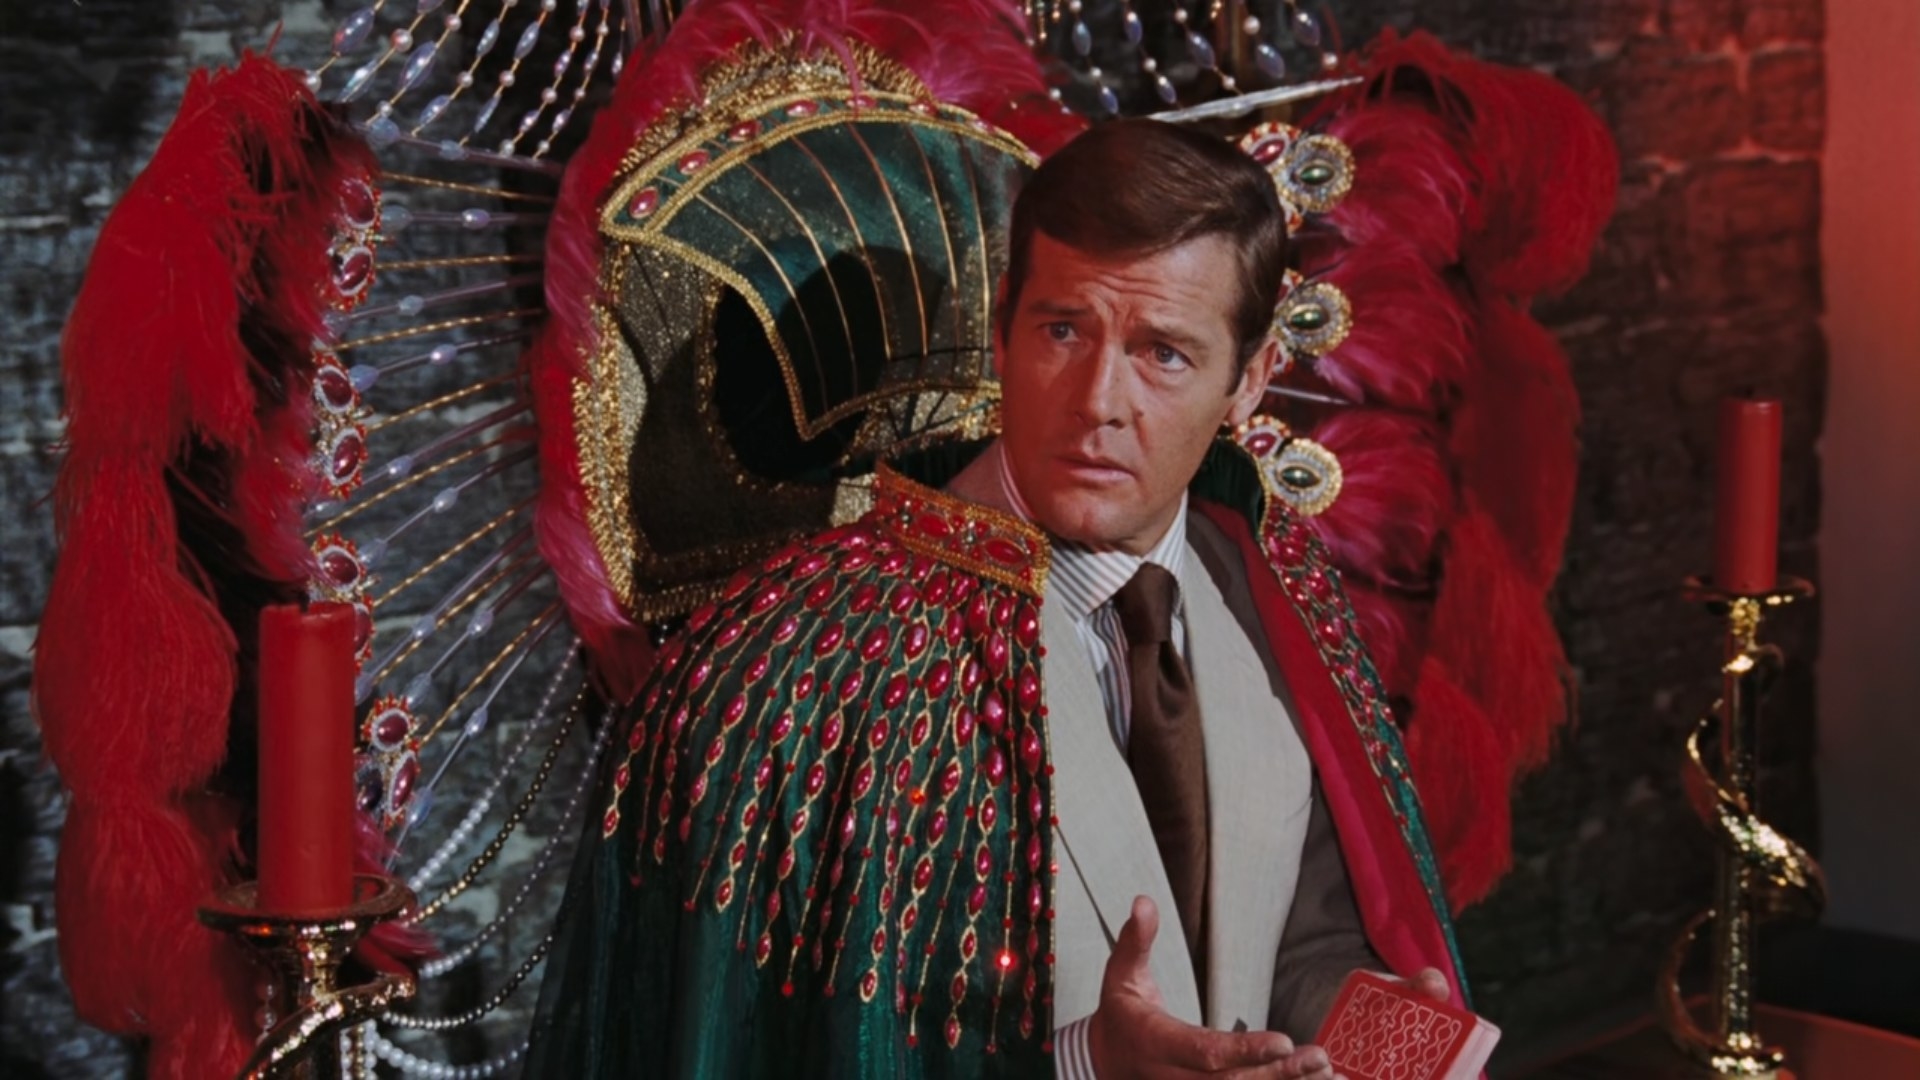 James Bond in a colorful robe